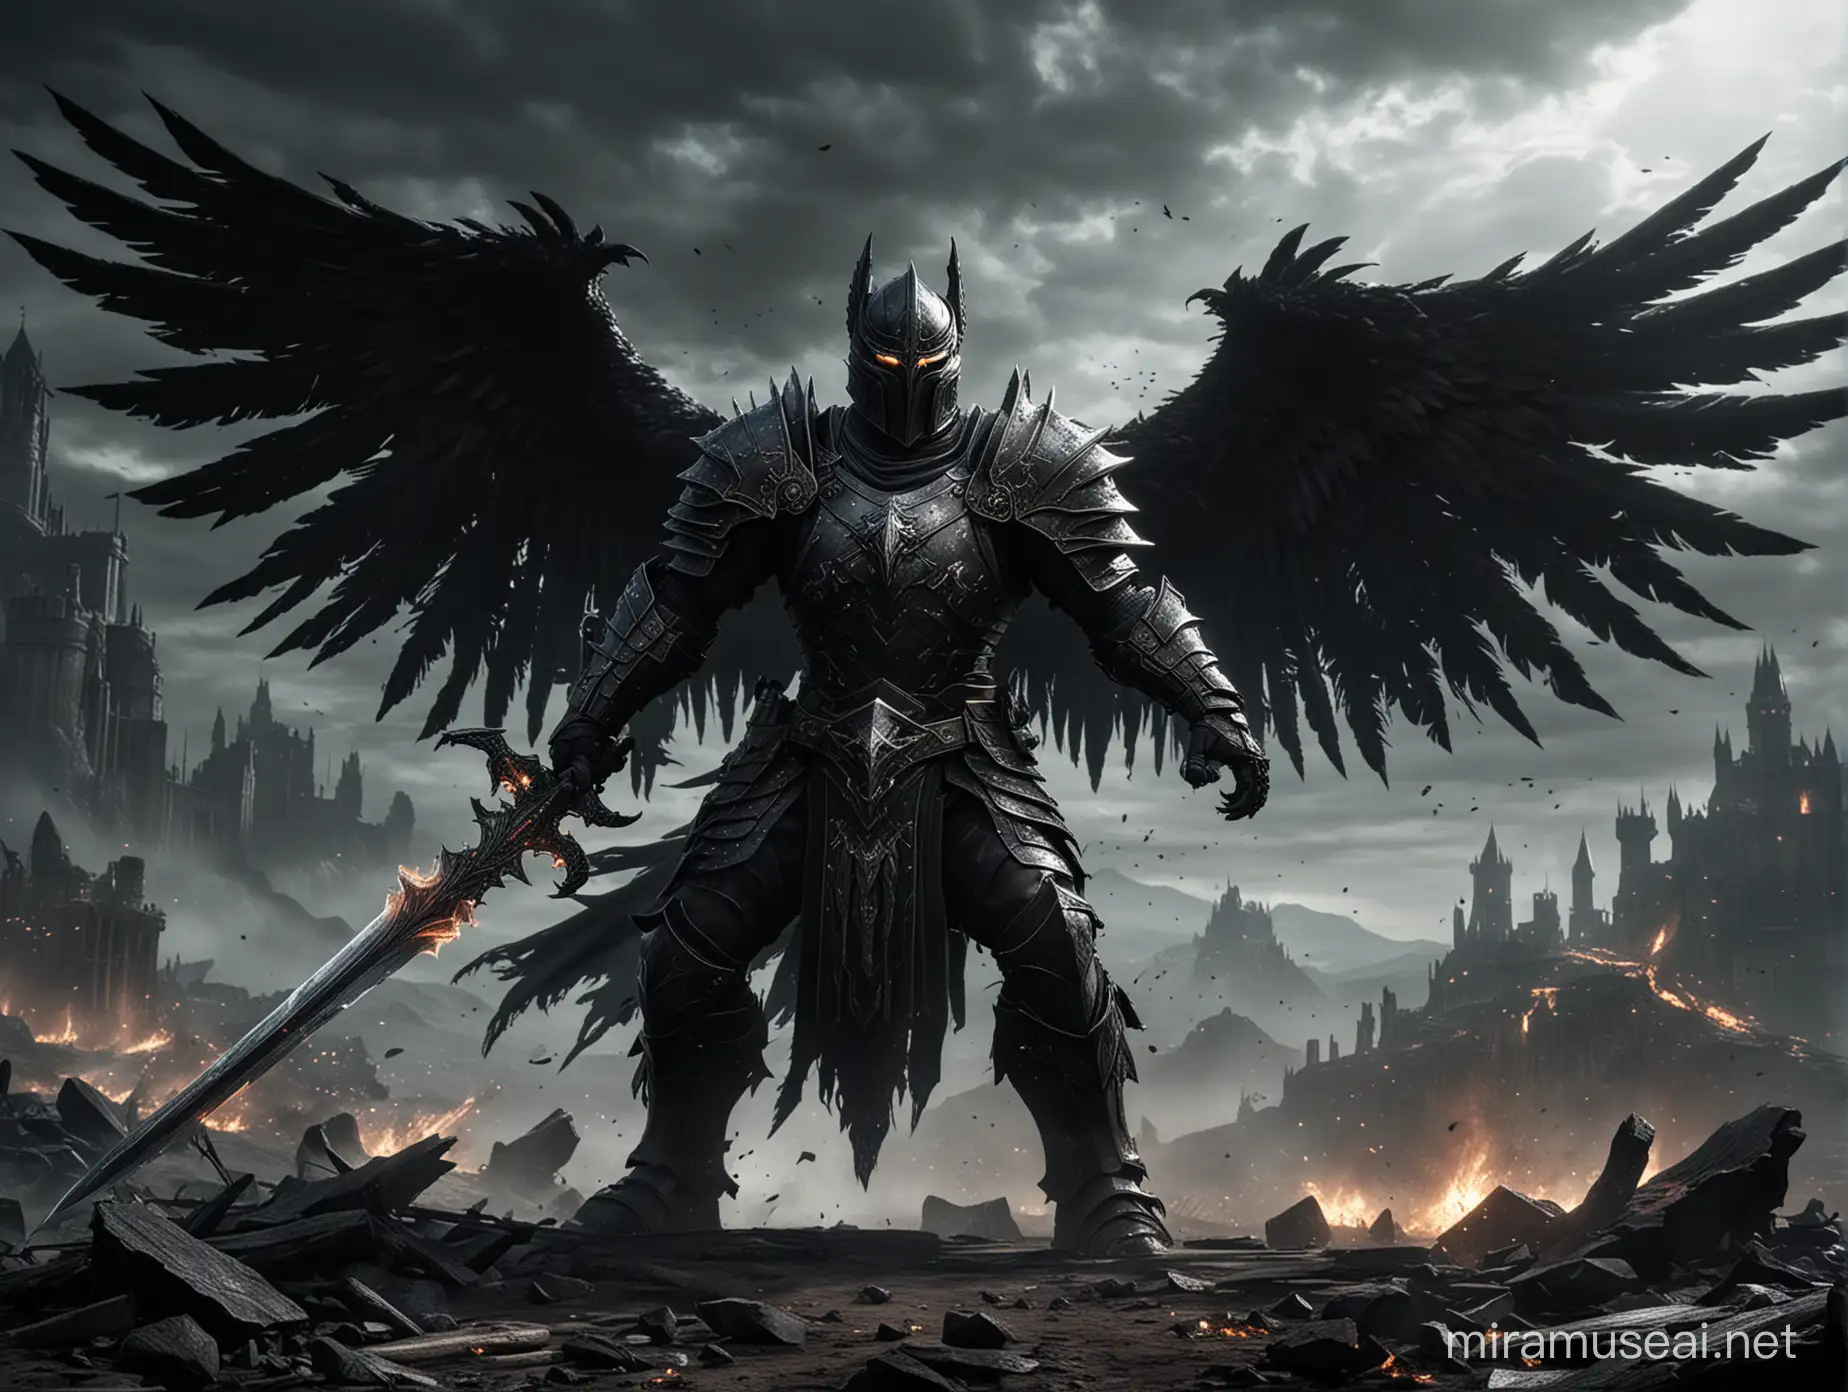 Elder Scrolls Inspired Final Boss Battle Confrontation with Colossal Black Knight